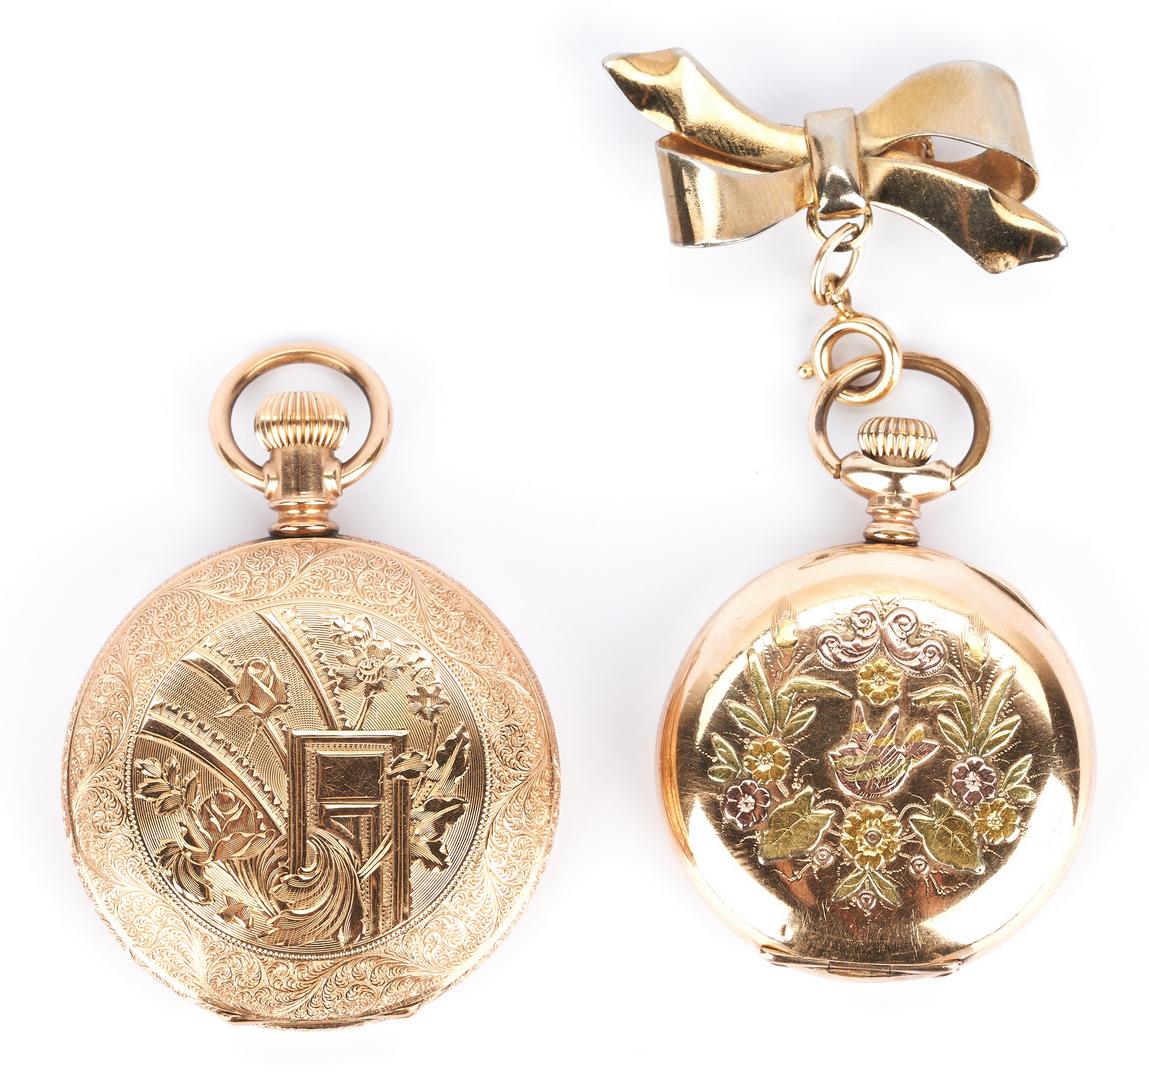 2 14K Hunting Case Pocket Watches - Image 5 of 12